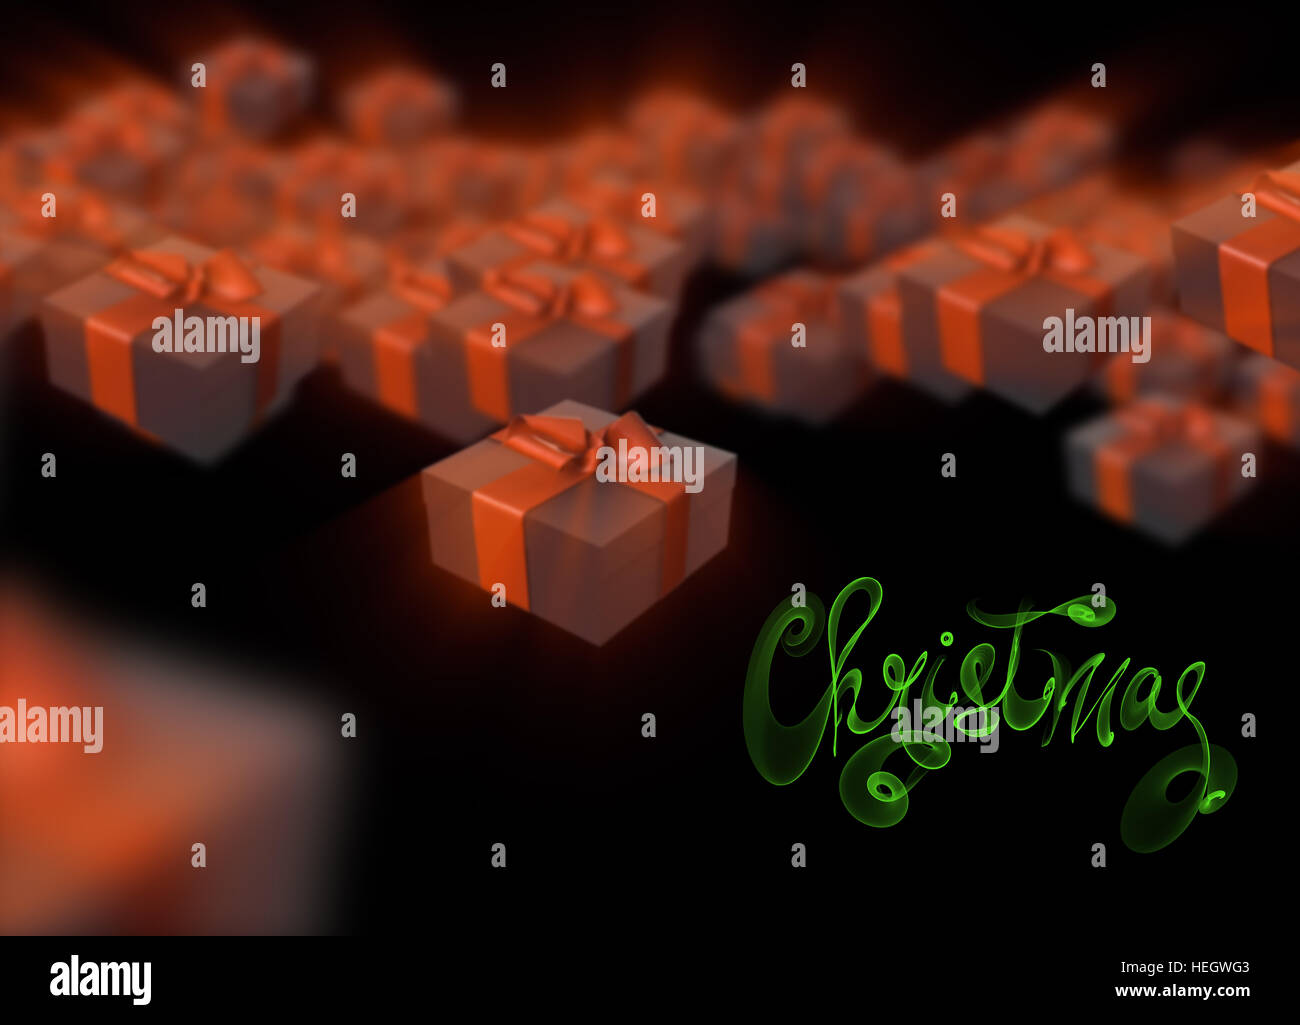 Christmas New Year colorful red and green gift boxes with bows of ribbons flying on black background. 3d illustration and lettering made of fire flame Stock Photo